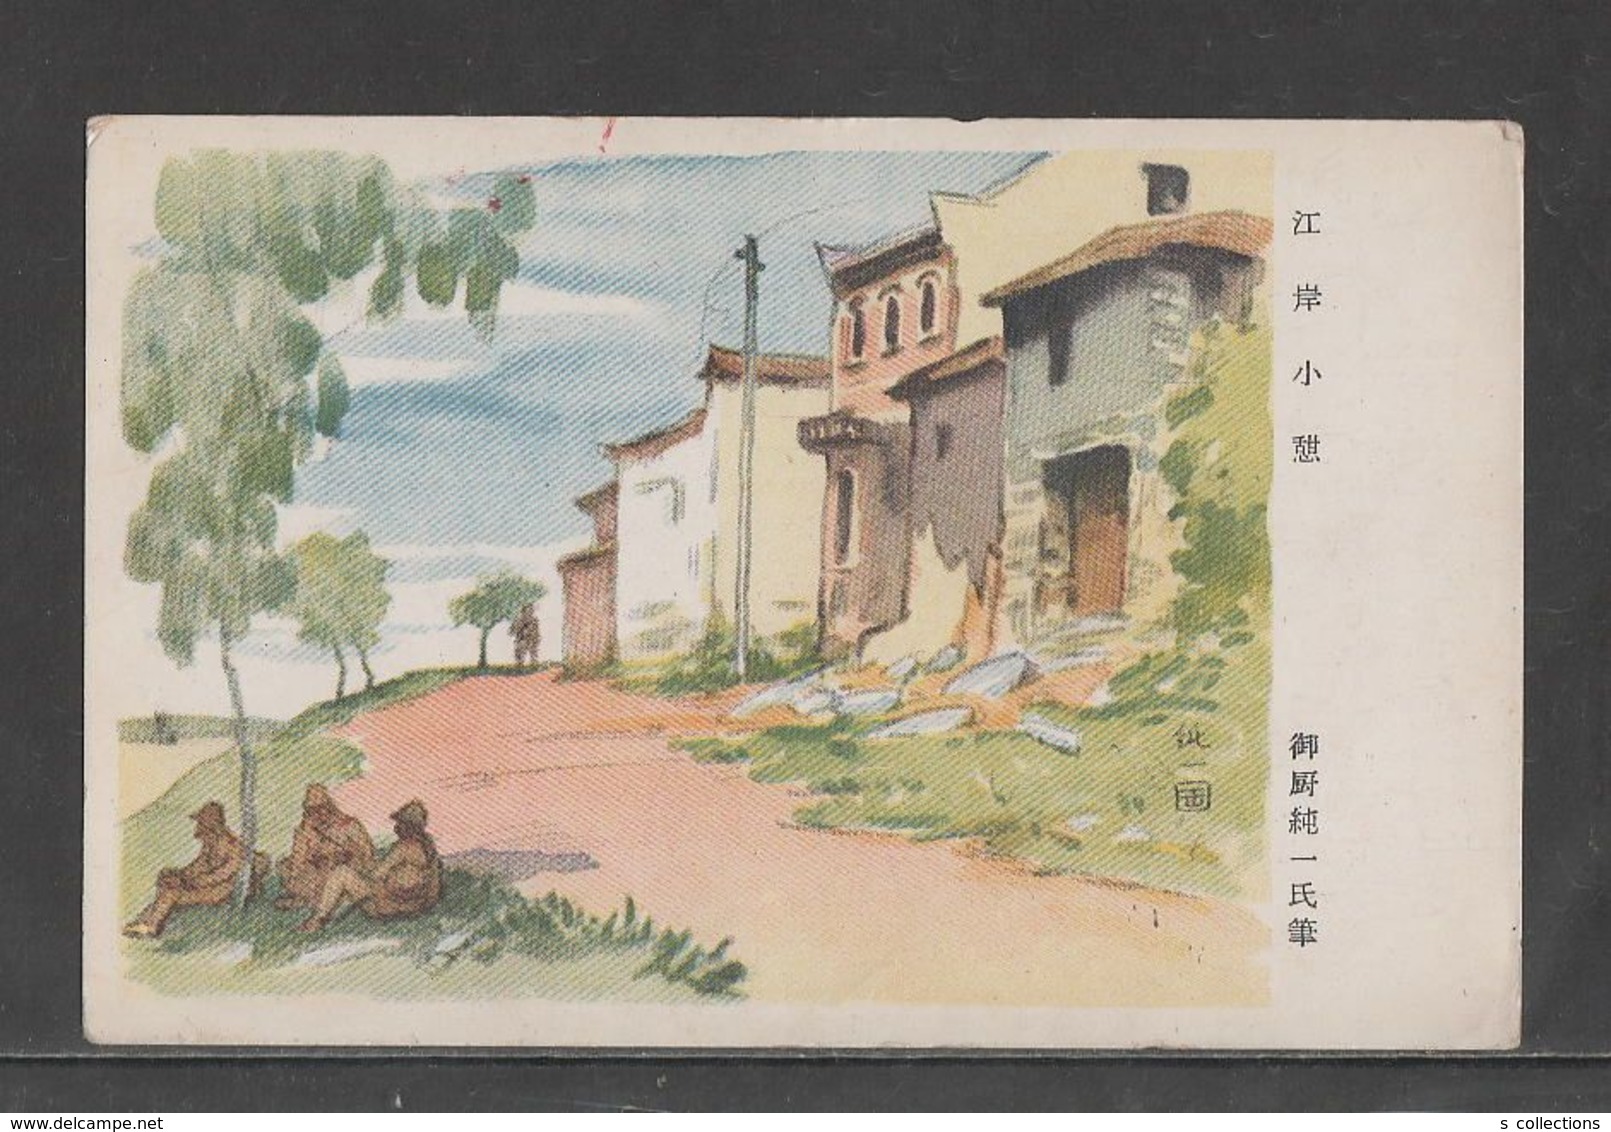 JAPAN WWII Military Jiang'an Picture Postcard NORTH CHINA Beijing WW2 MANCHURIA CHINE MANDCHOUKOUO JAPON GIAPPONE - 1941-45 Chine Du Nord